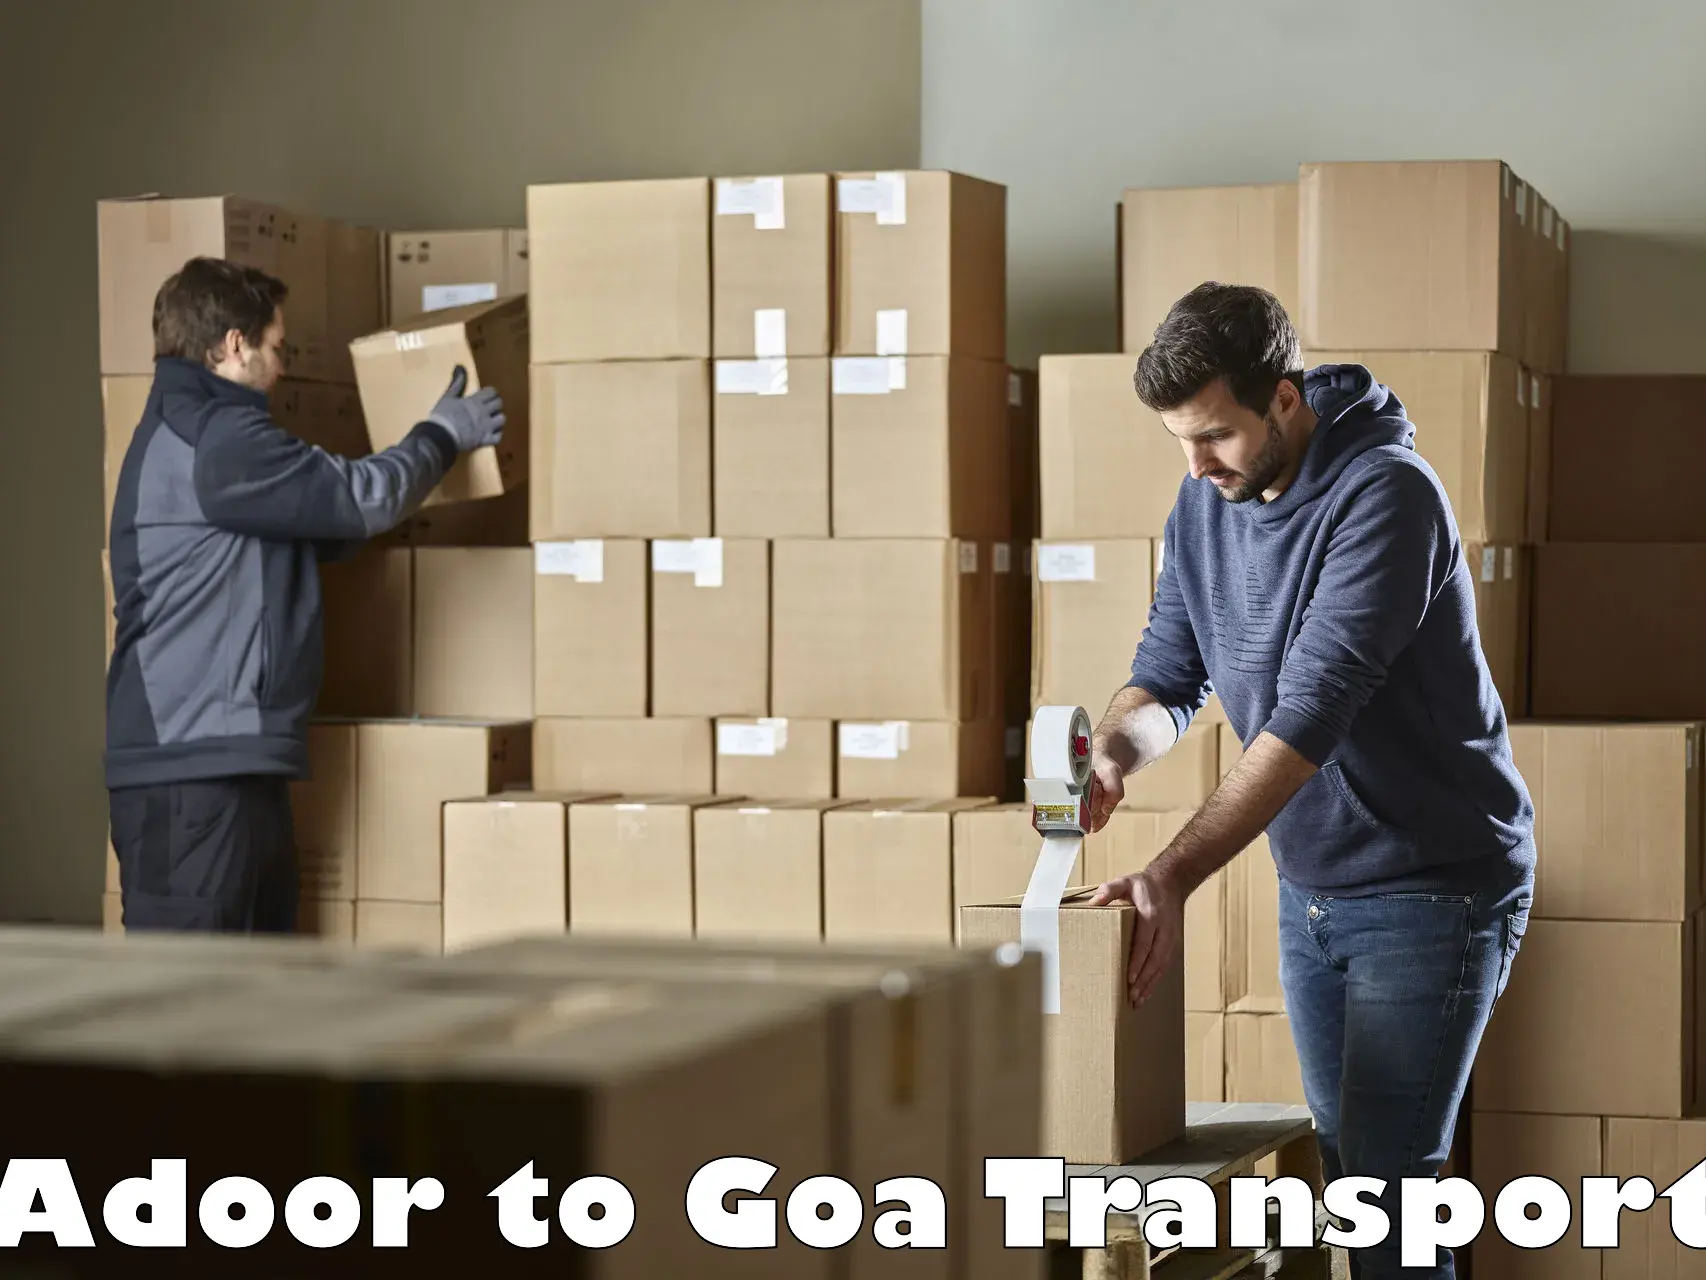 Cycle transportation service Adoor to Goa